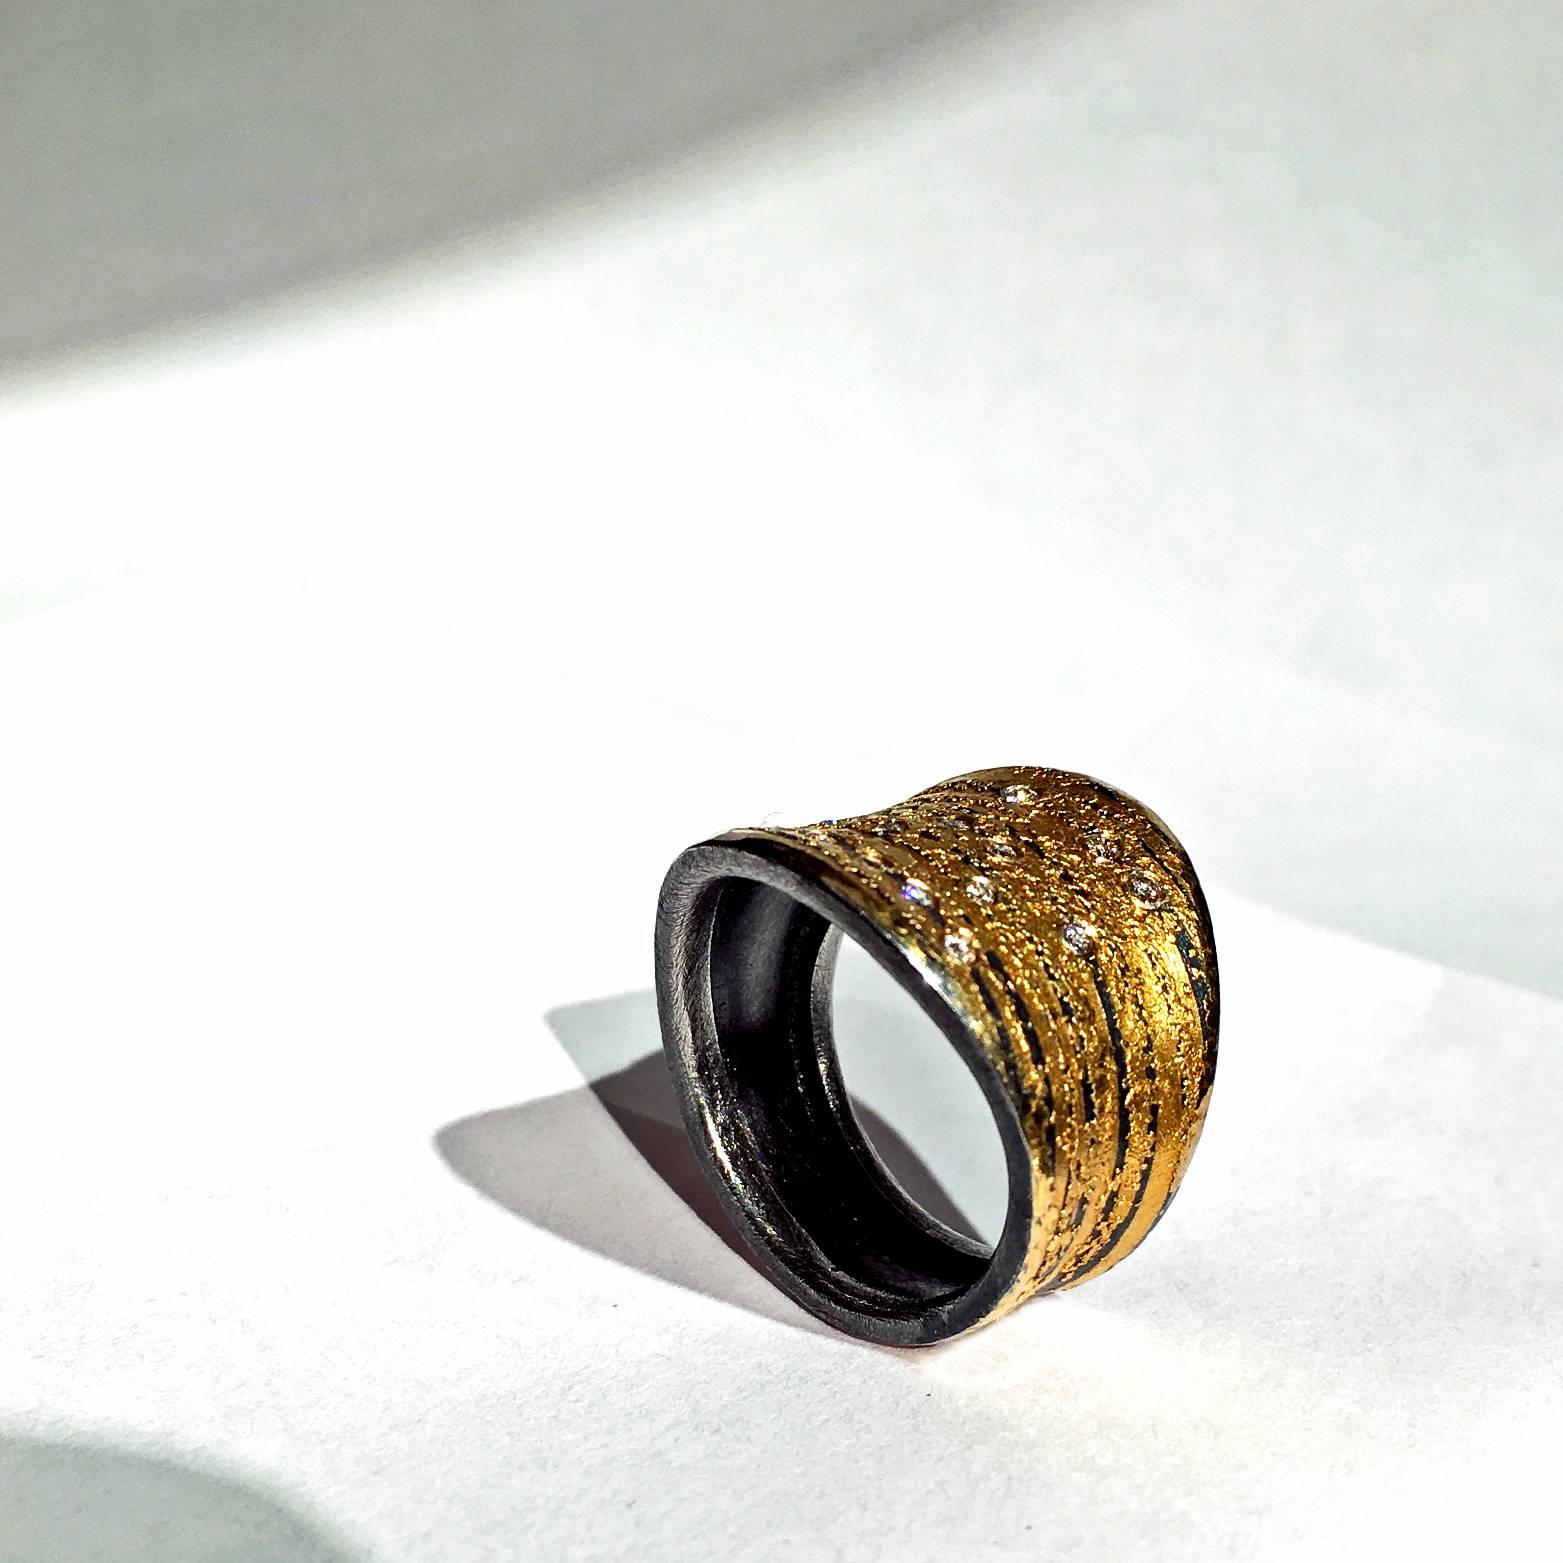 One-of-a-Kind Ring handcrafted in 24k gold and oxidized sterling silver with 0.17 total carats of bezel-set round brilliant-cut diamonds. (Size 8.25 - can be sized).